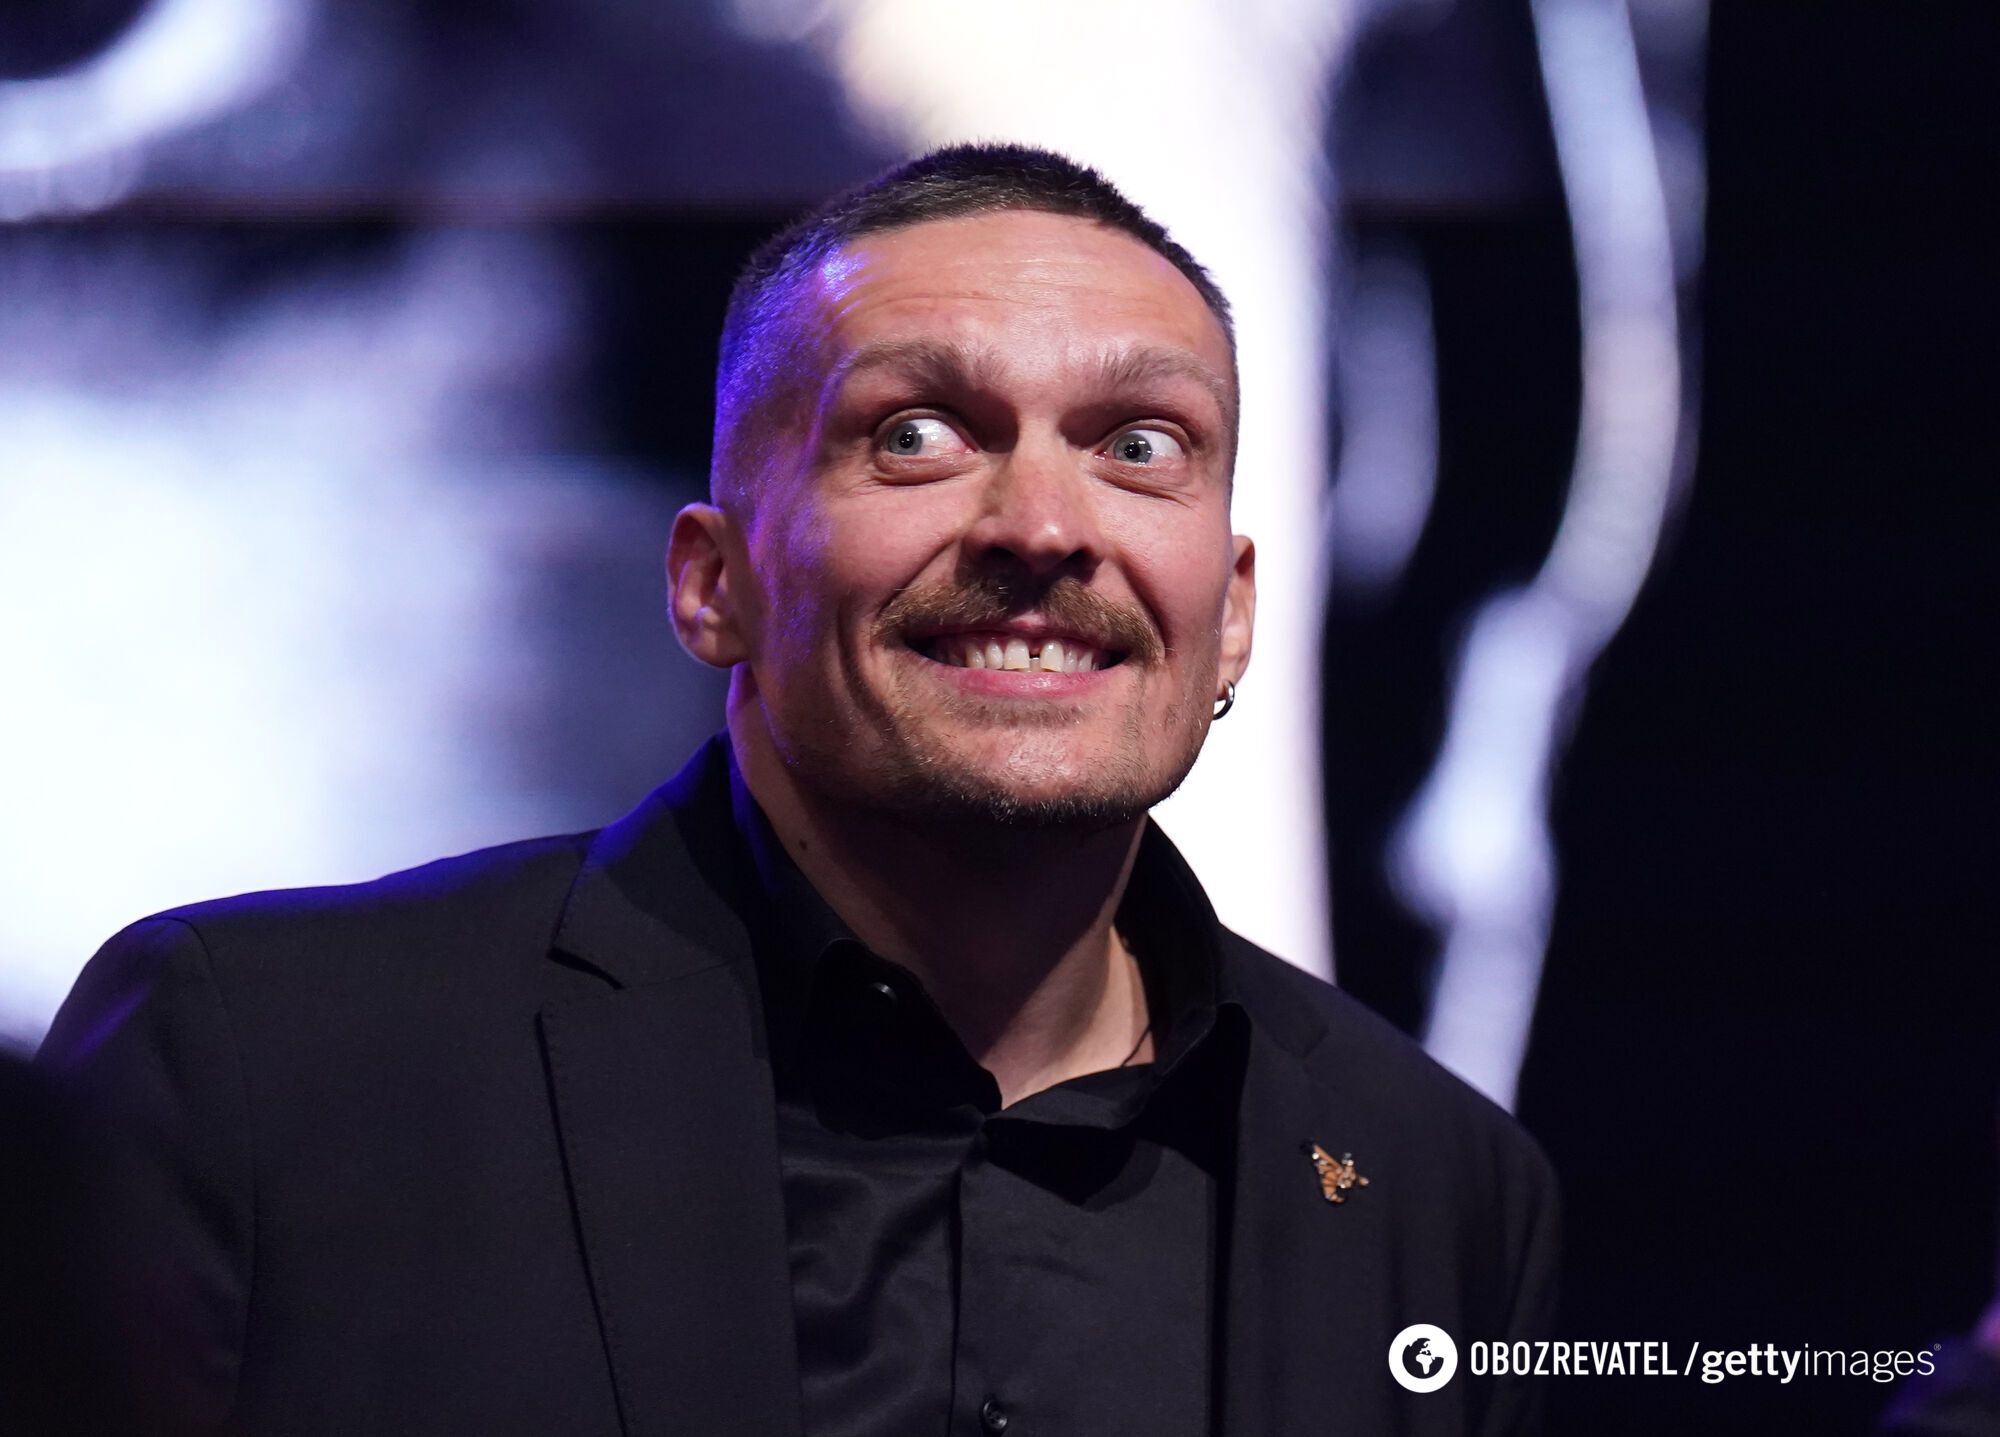 ''We need to be patient'': Joshua told what he expects from the fight between Usyk and Fury